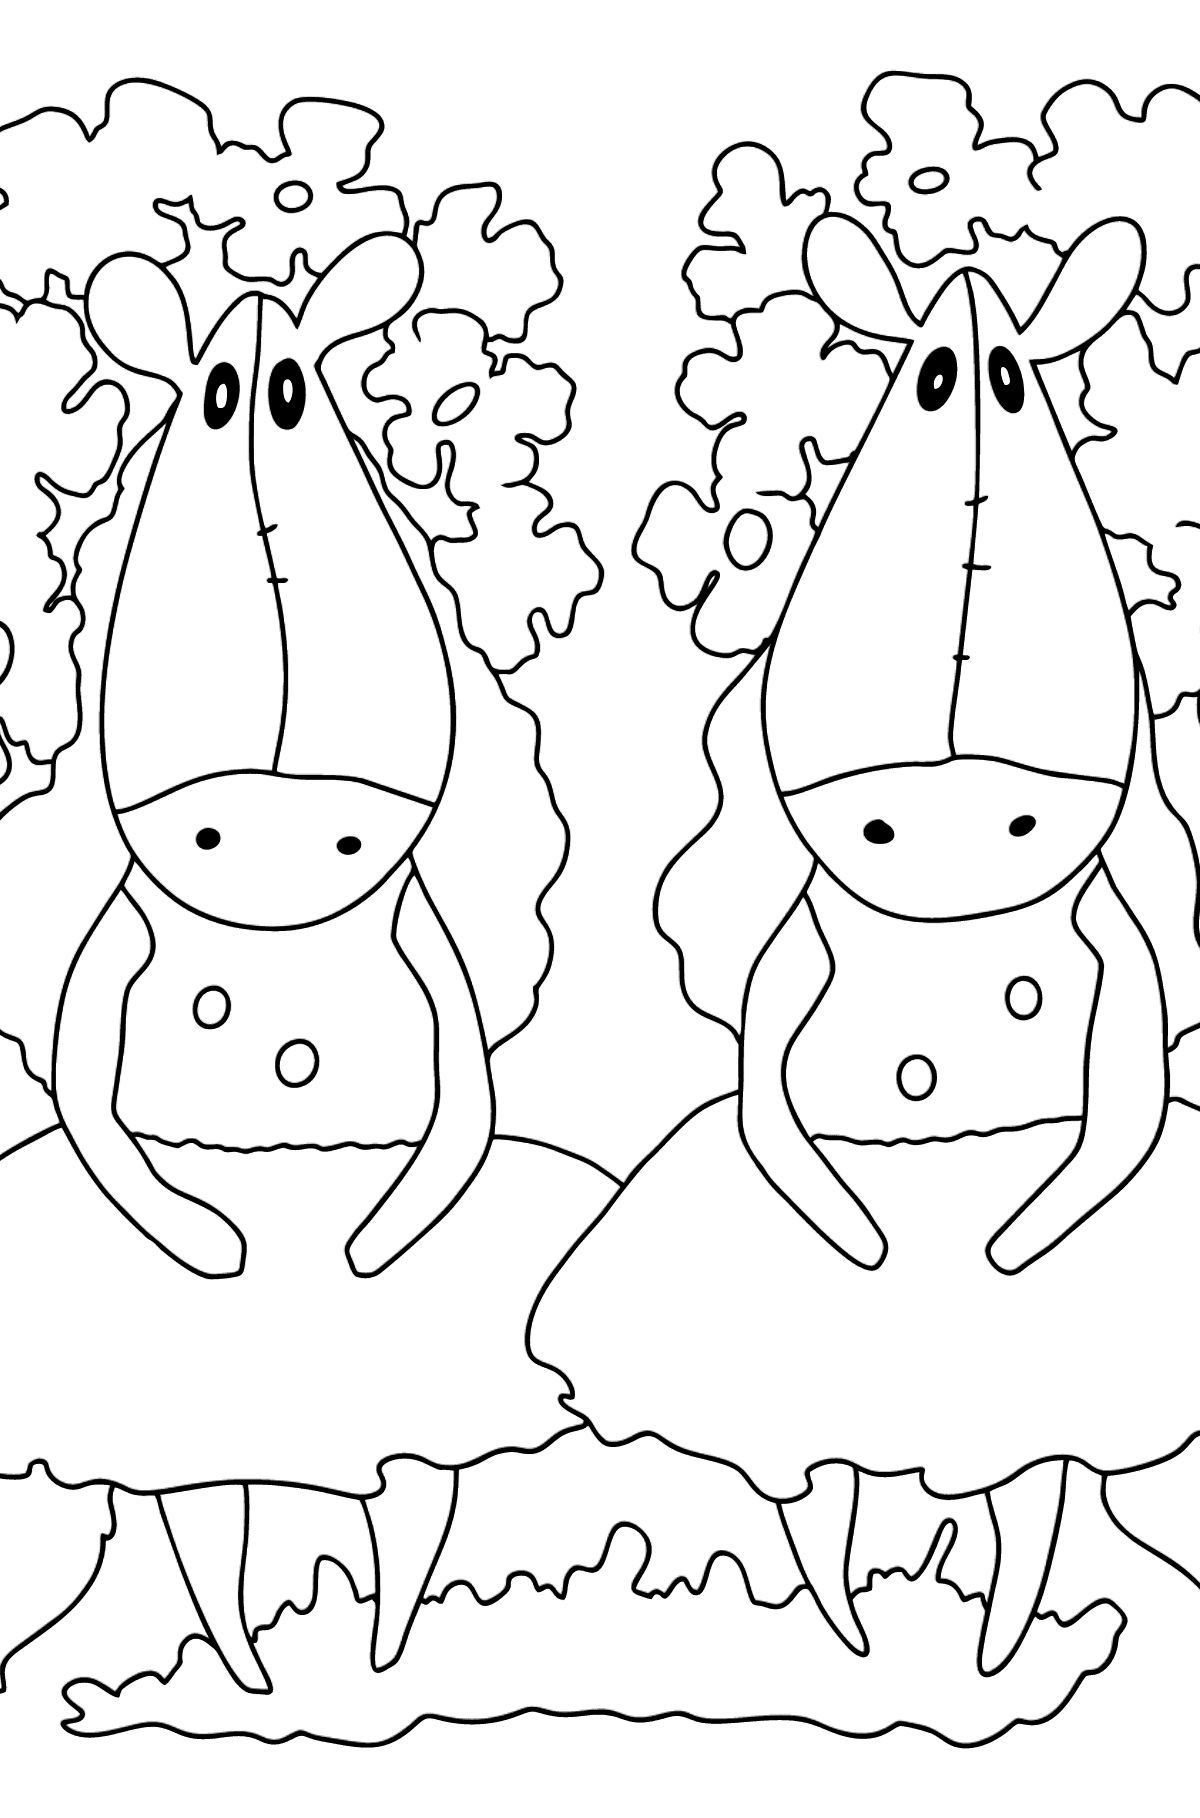 Coloring page magic horses - Coloring Pages for Kids